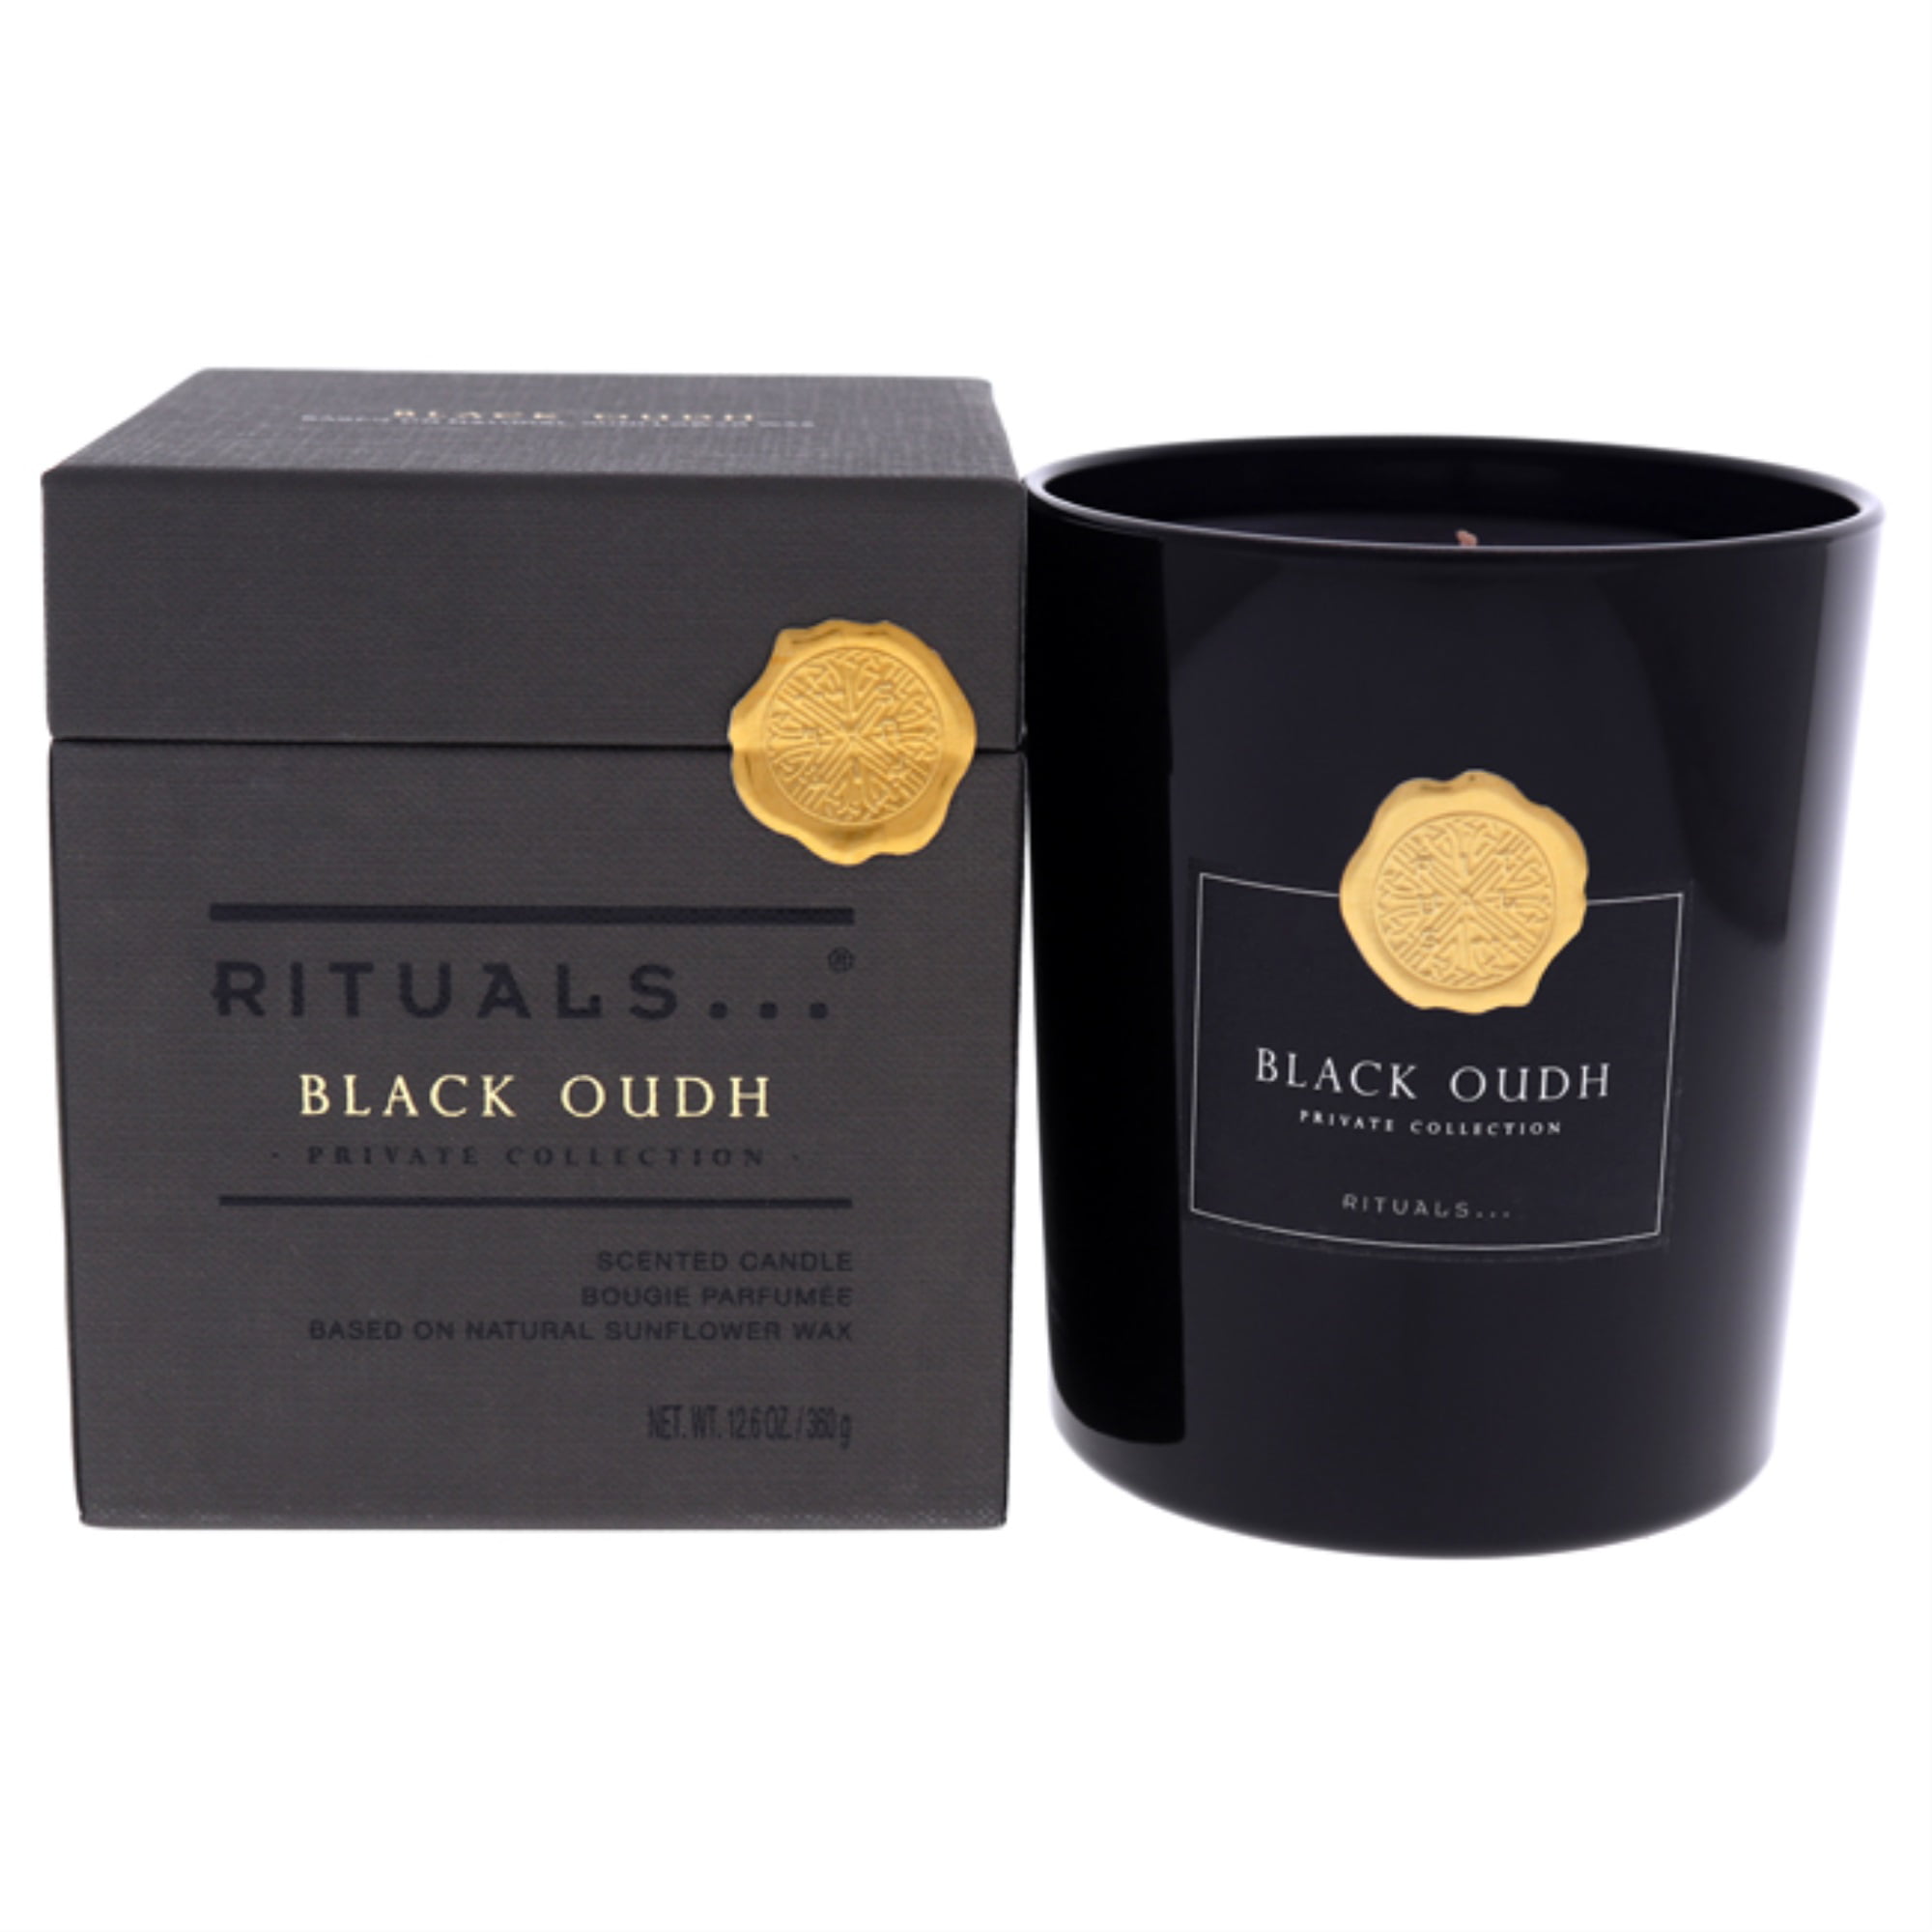 Black Oudh Scented Candle by Rituals for Unisex - 12.6 oz Candle 